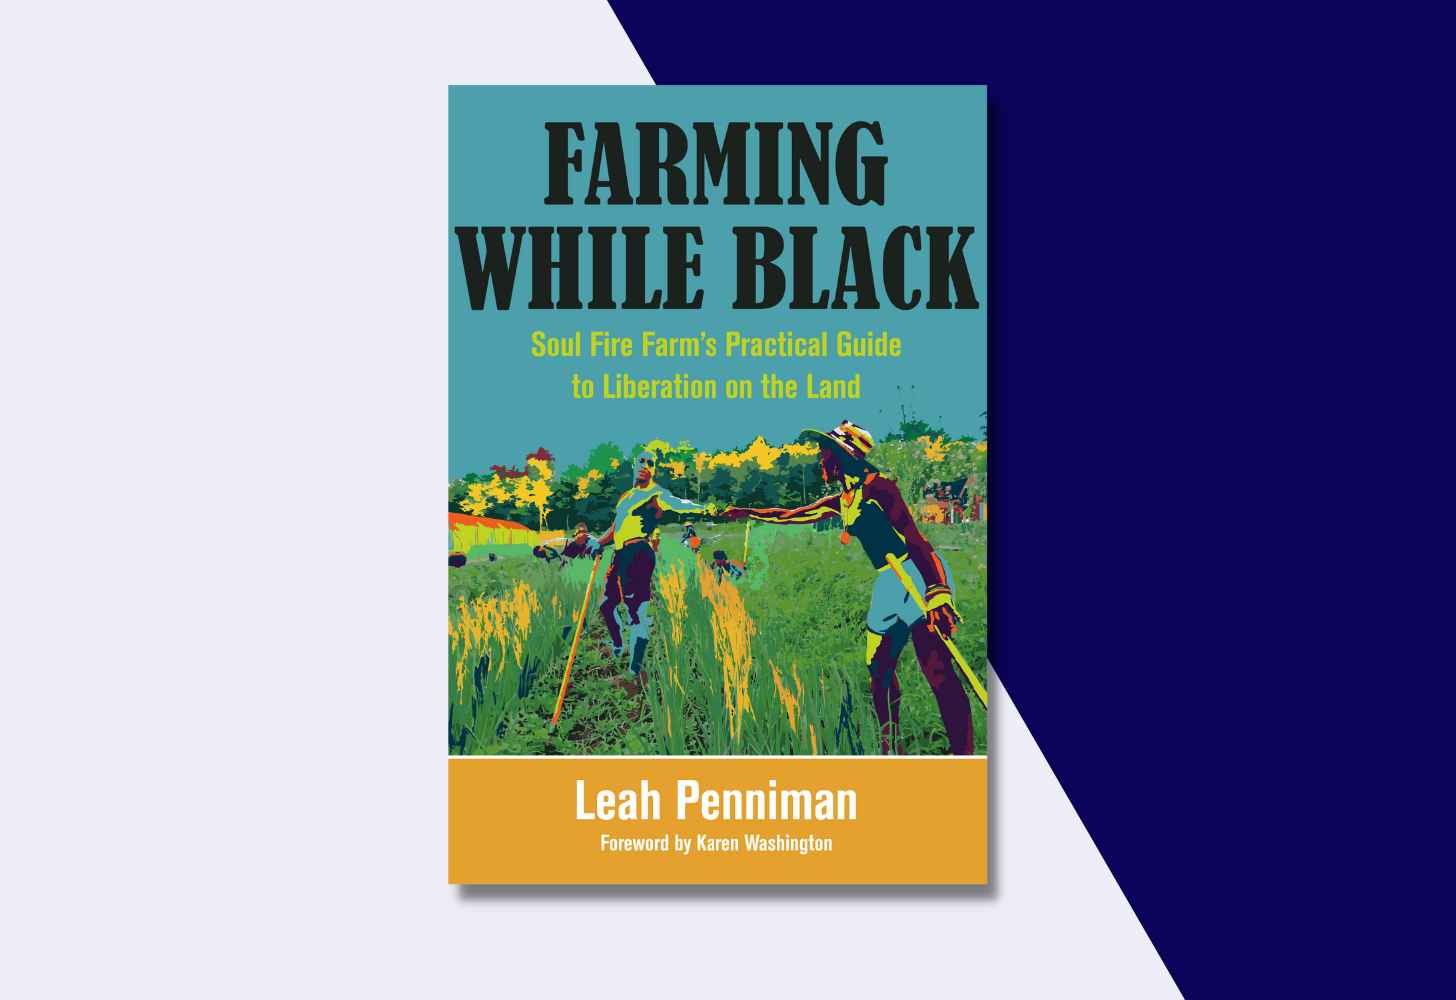 The Cover Of “Farming While Black: Soul Fire Farm’s Practical Guide to Liberation on the Land” by Leah Penniman